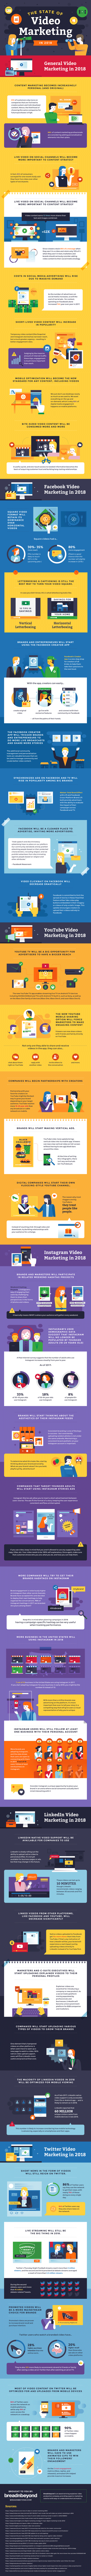 The State of Video Marketing in 2018